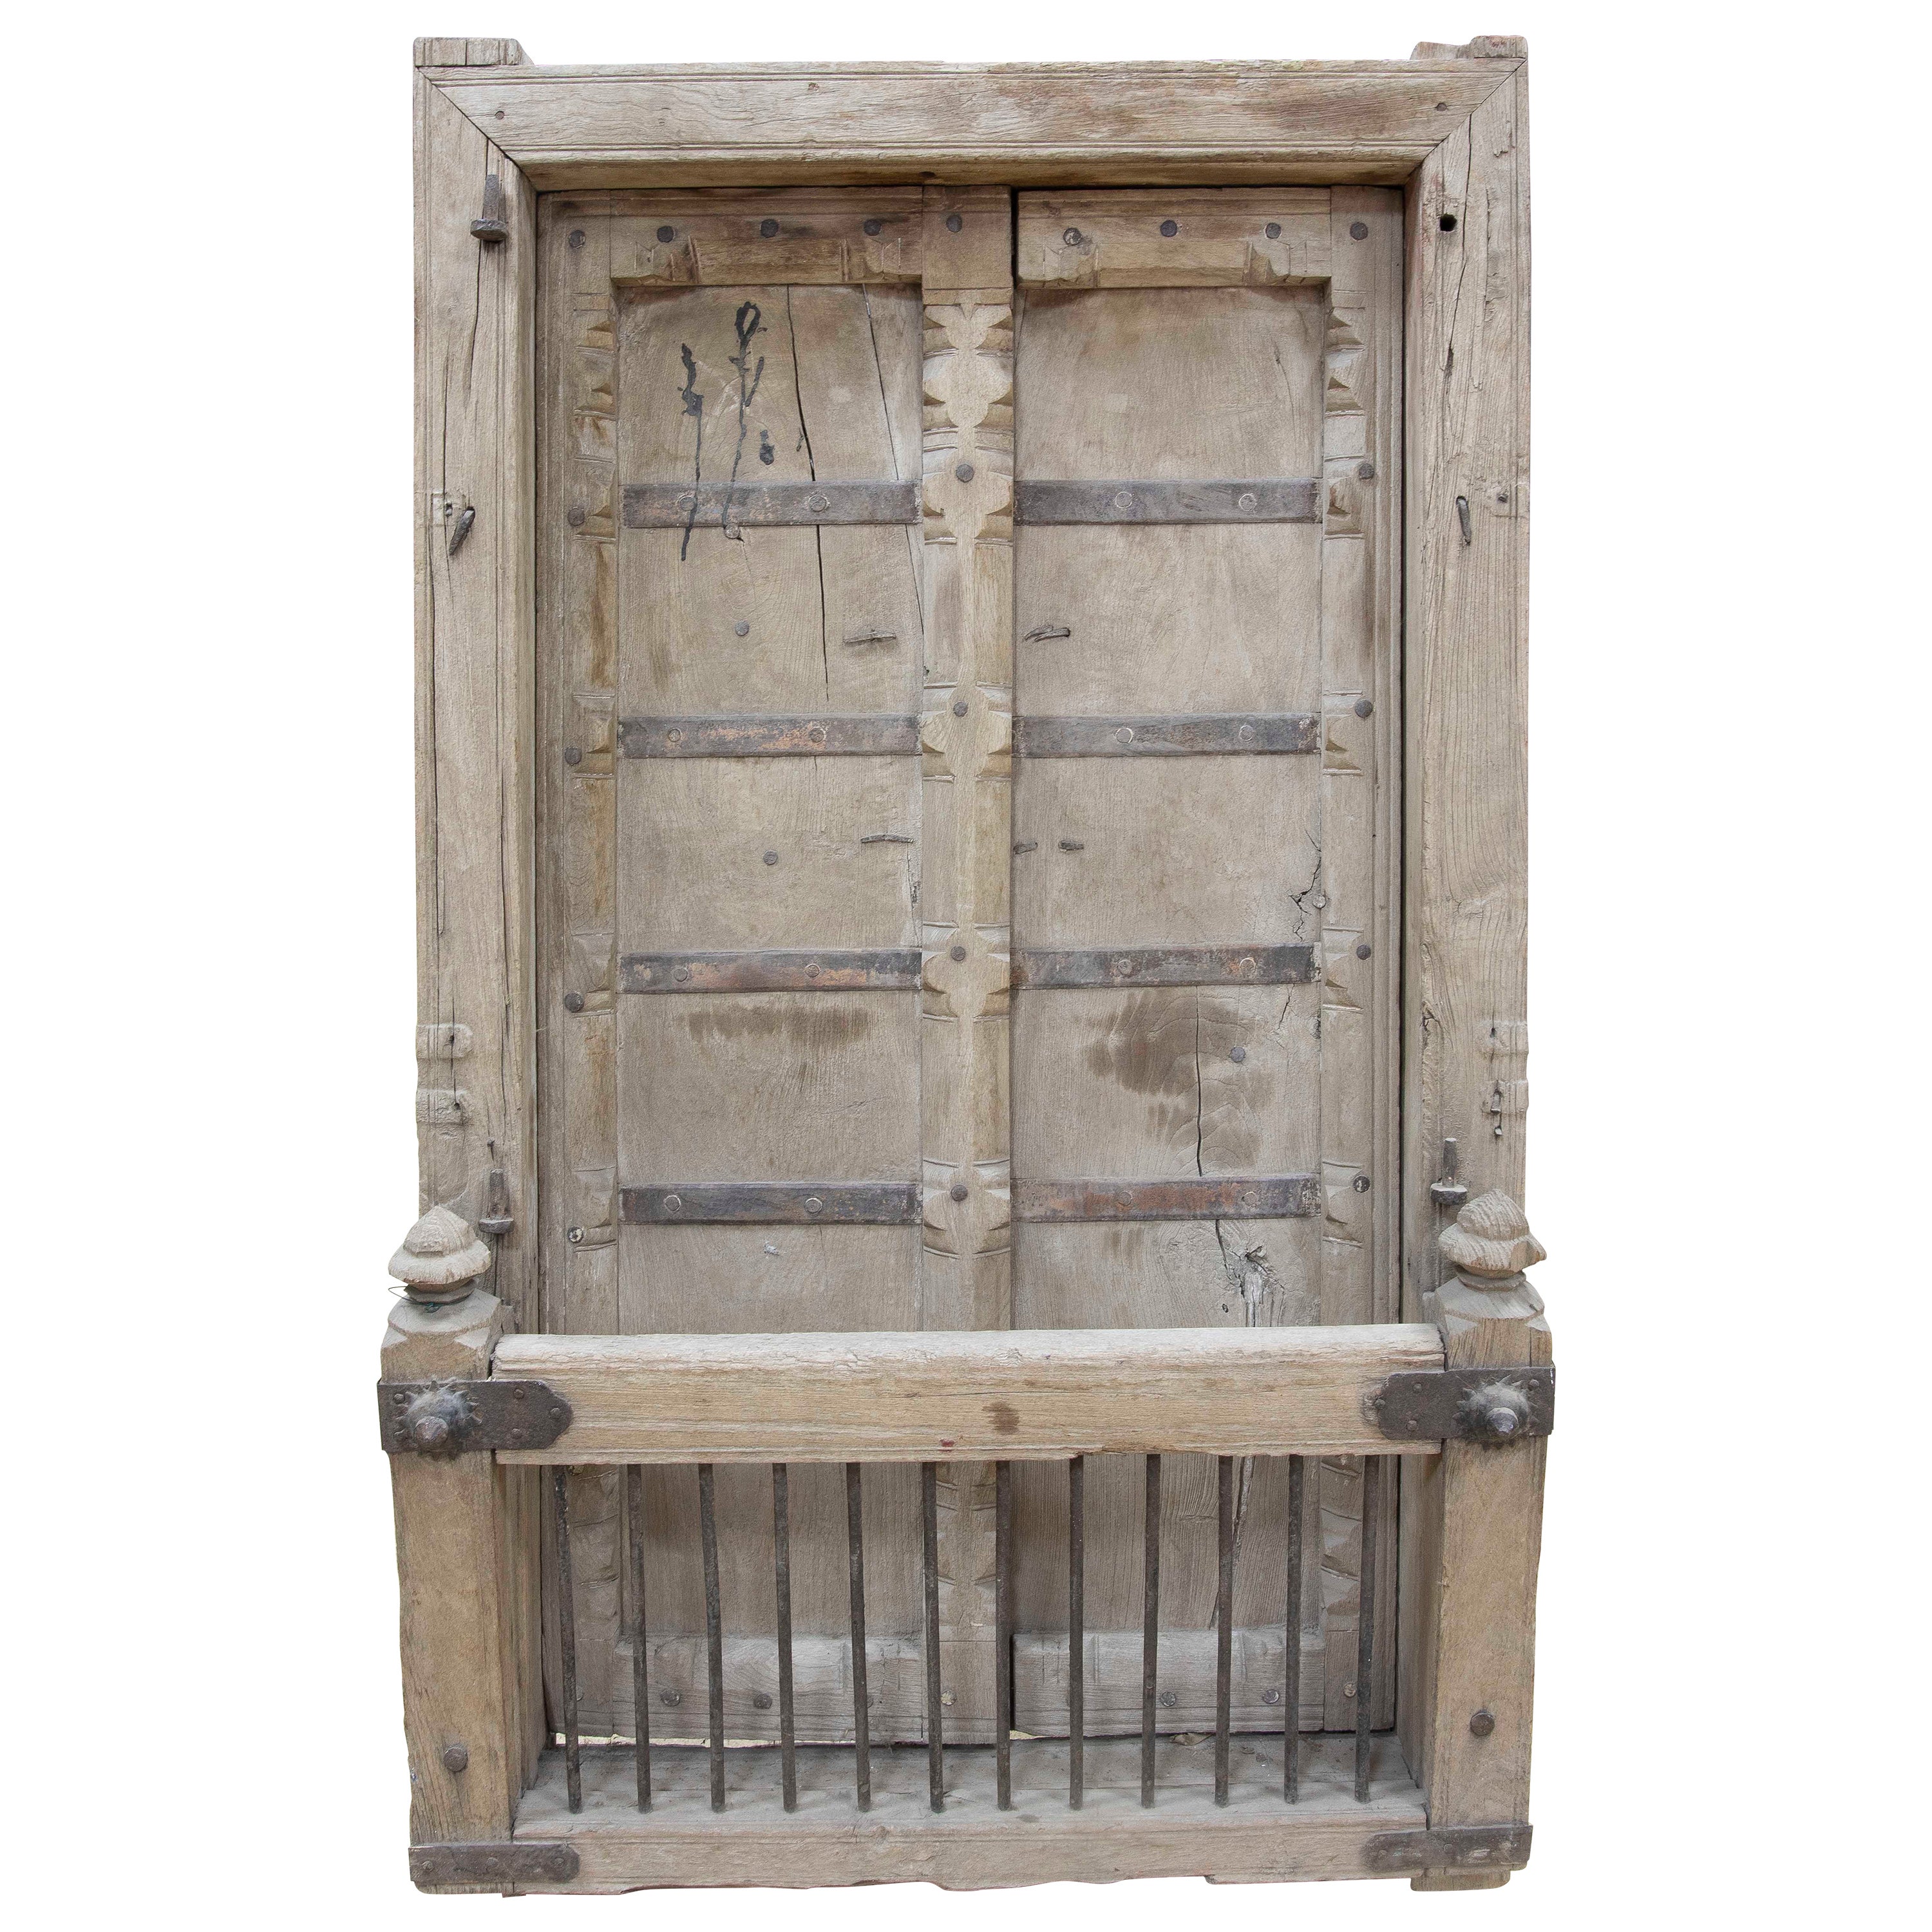 Indian Rustic Wooden Window with Iron Decorations 